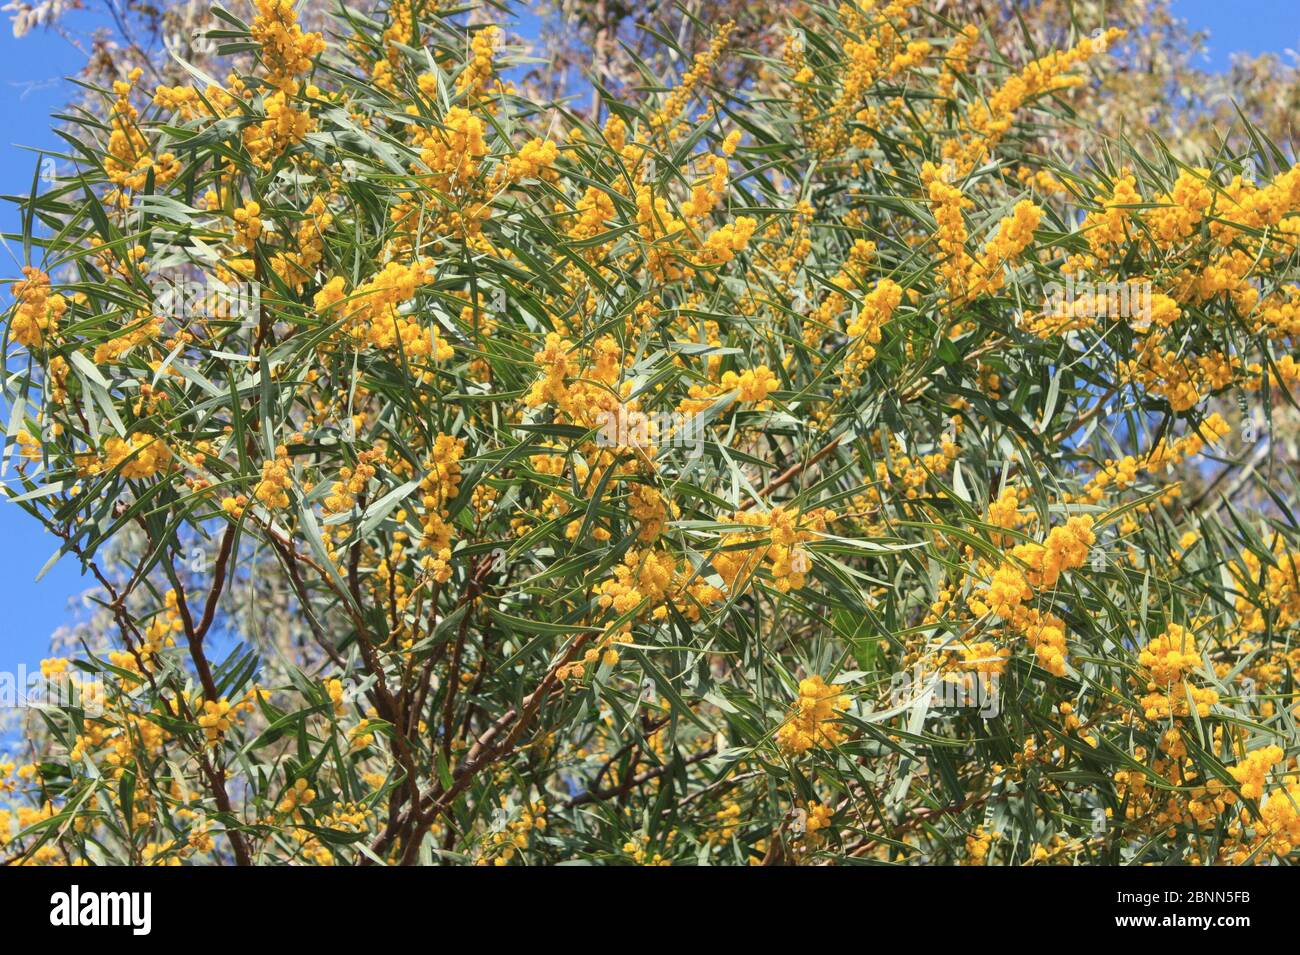 Beautiful yellow flowers and green leaves of a wattle tree in the spring sunshine growing near the Segesta Temple, in Trapani, on Sicily, Italy. Stock Photo